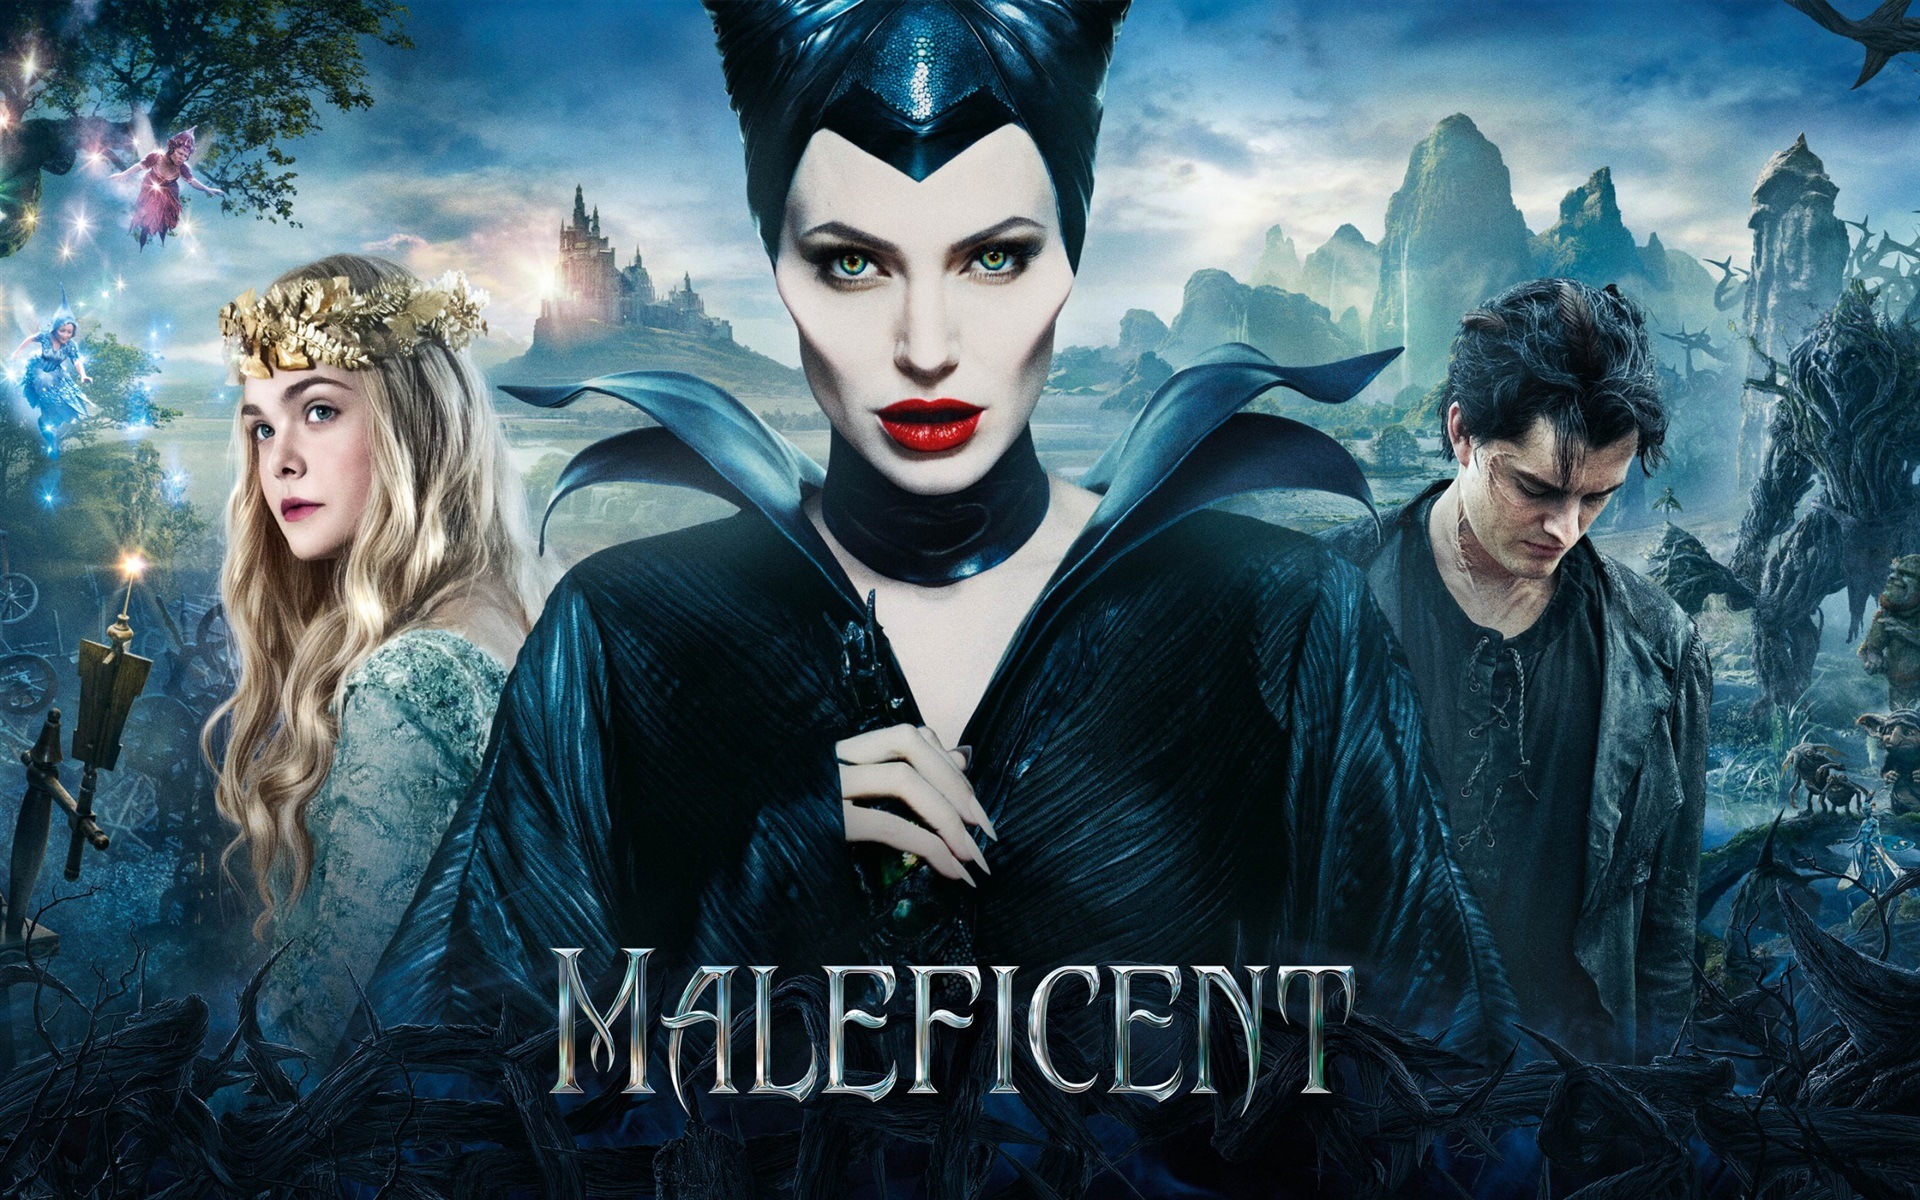 Maleficent 2014 HD movie wallpapers #1 - 1920x1200